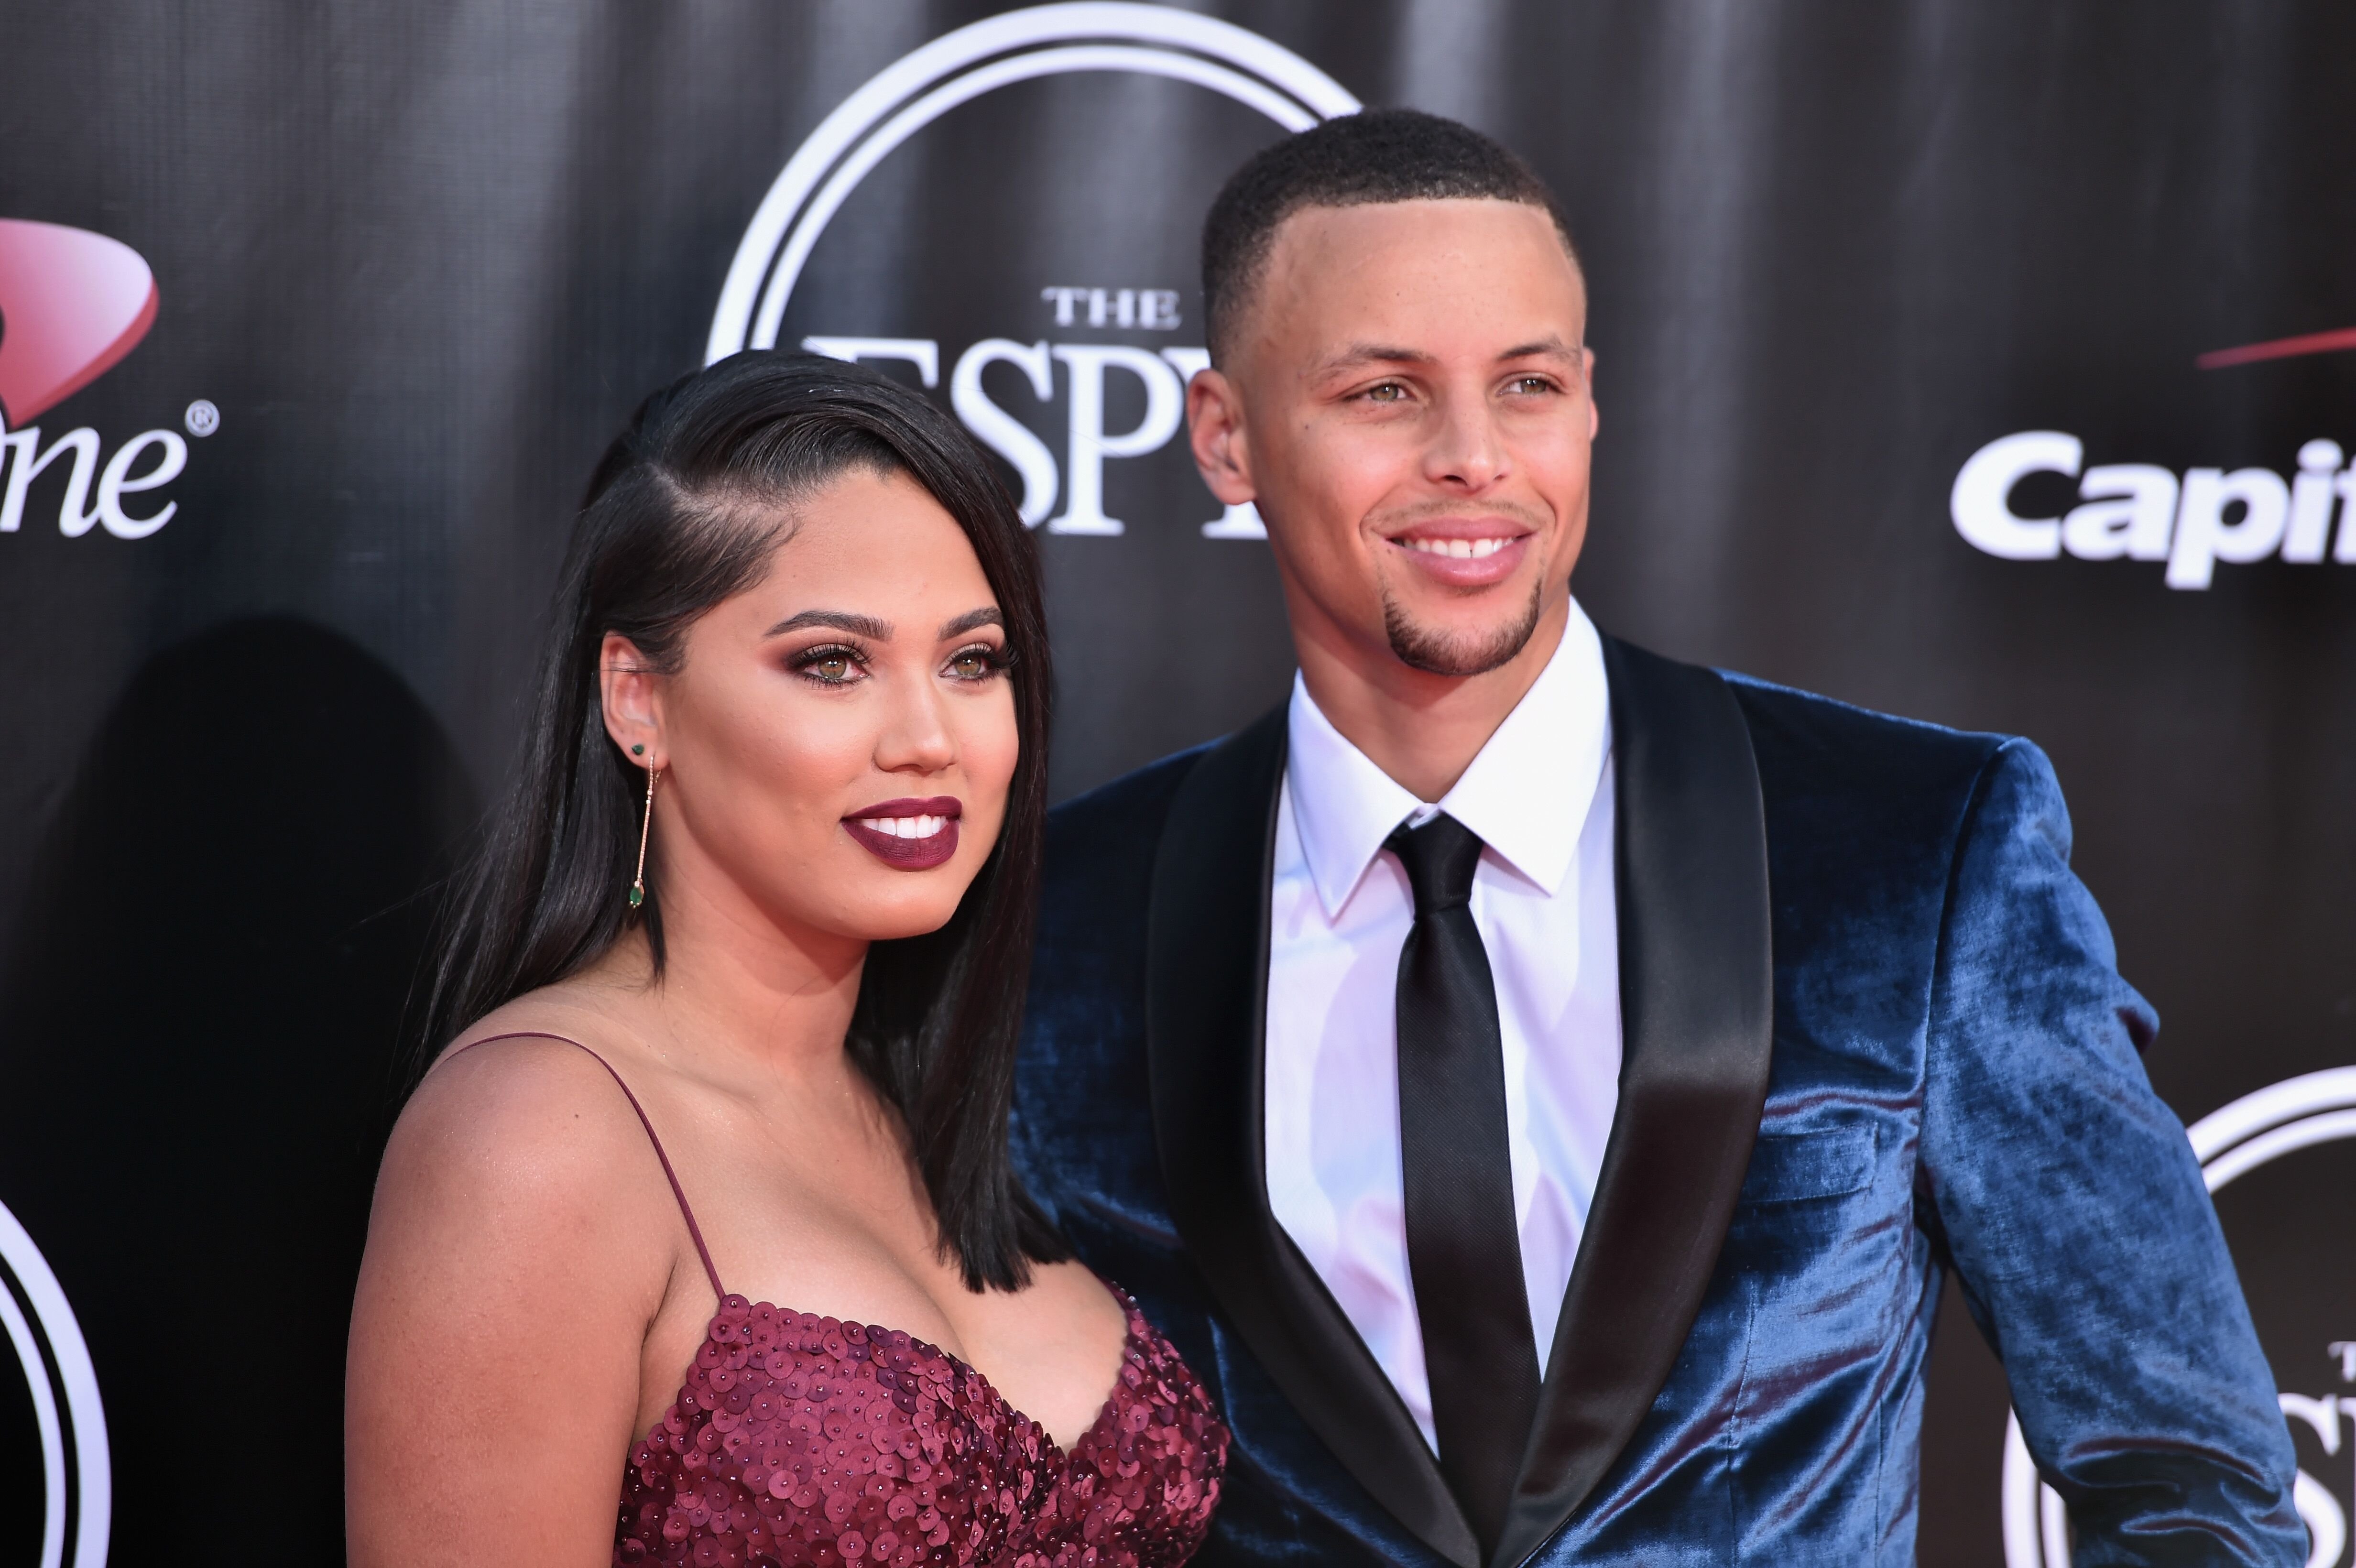 Stephen Curry and Ayesha Curry attend the 2016 ESPYS at Microsoft Theater on July 13, 2016 in Los Angeles, California | Photo: Getty Images 